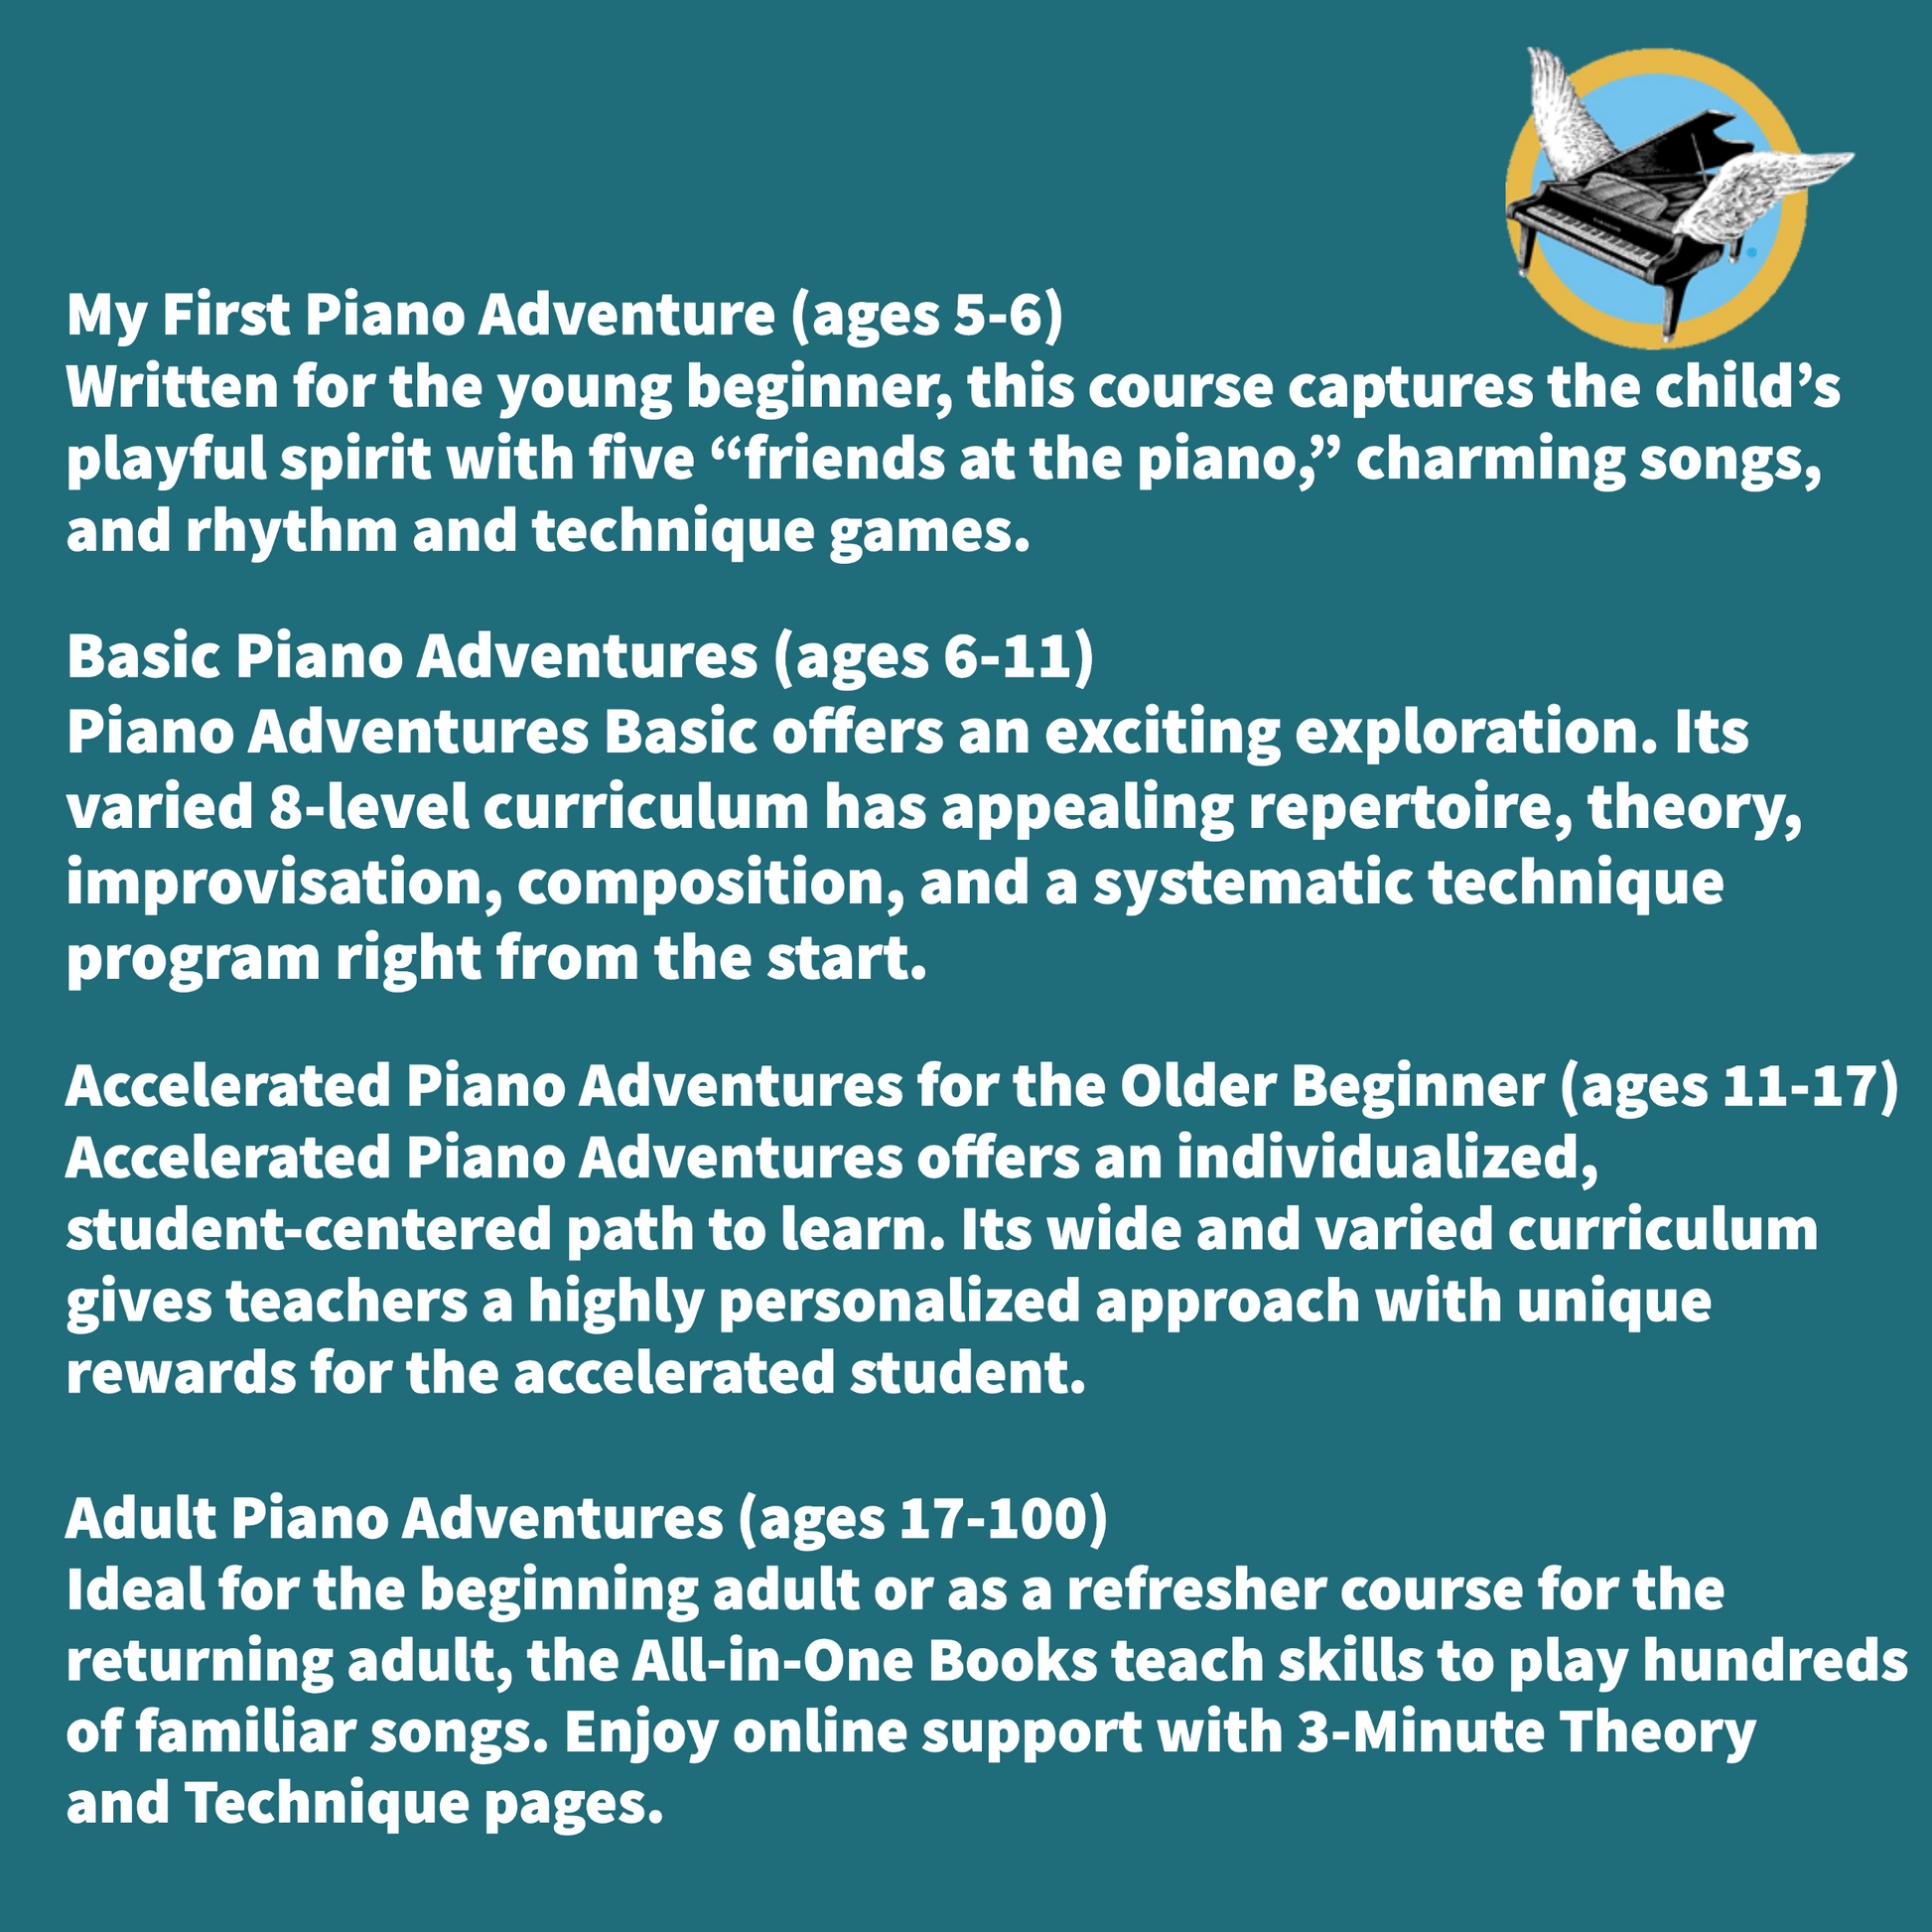 Accelerated Piano Adventures For The Older Beginner - Theory Book 2 & Keyboard